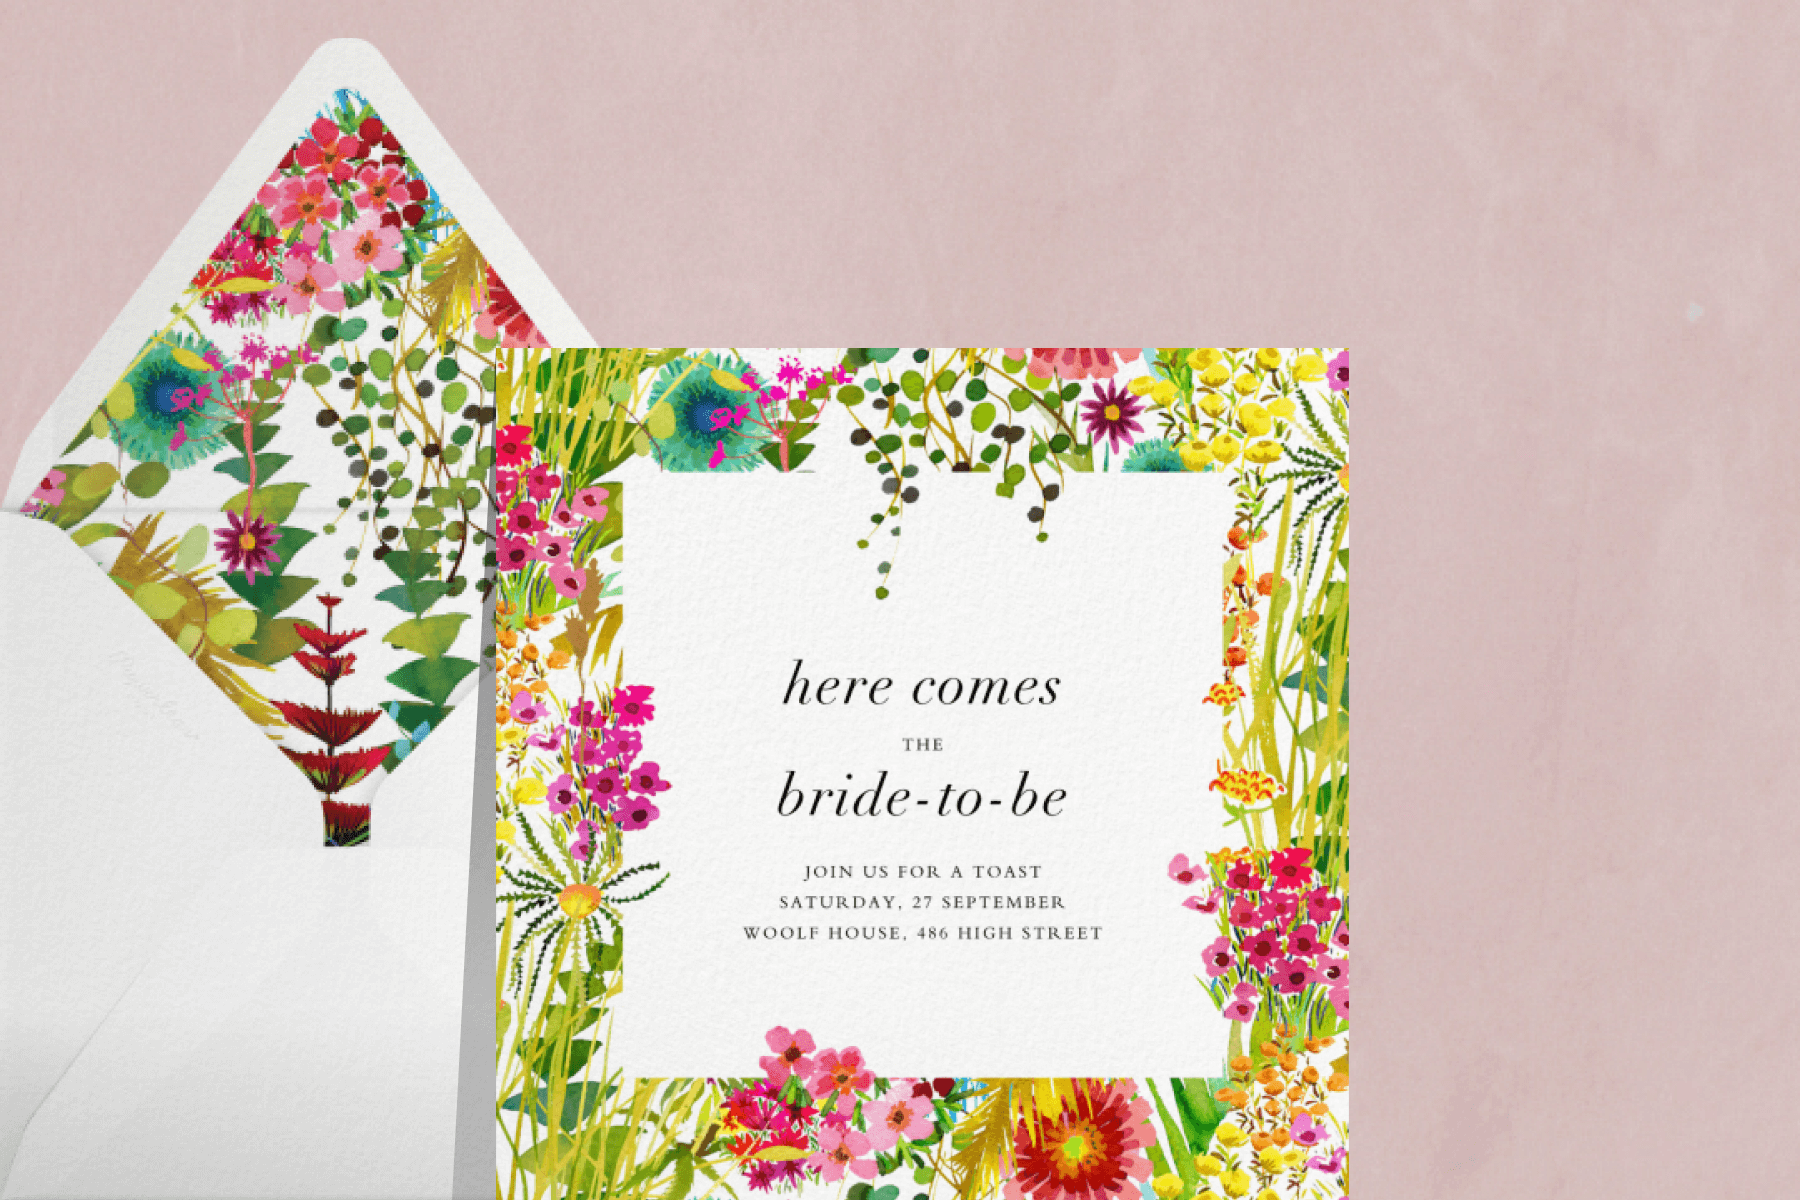 A bridal shower invitation featuring a border of colorful flowers.